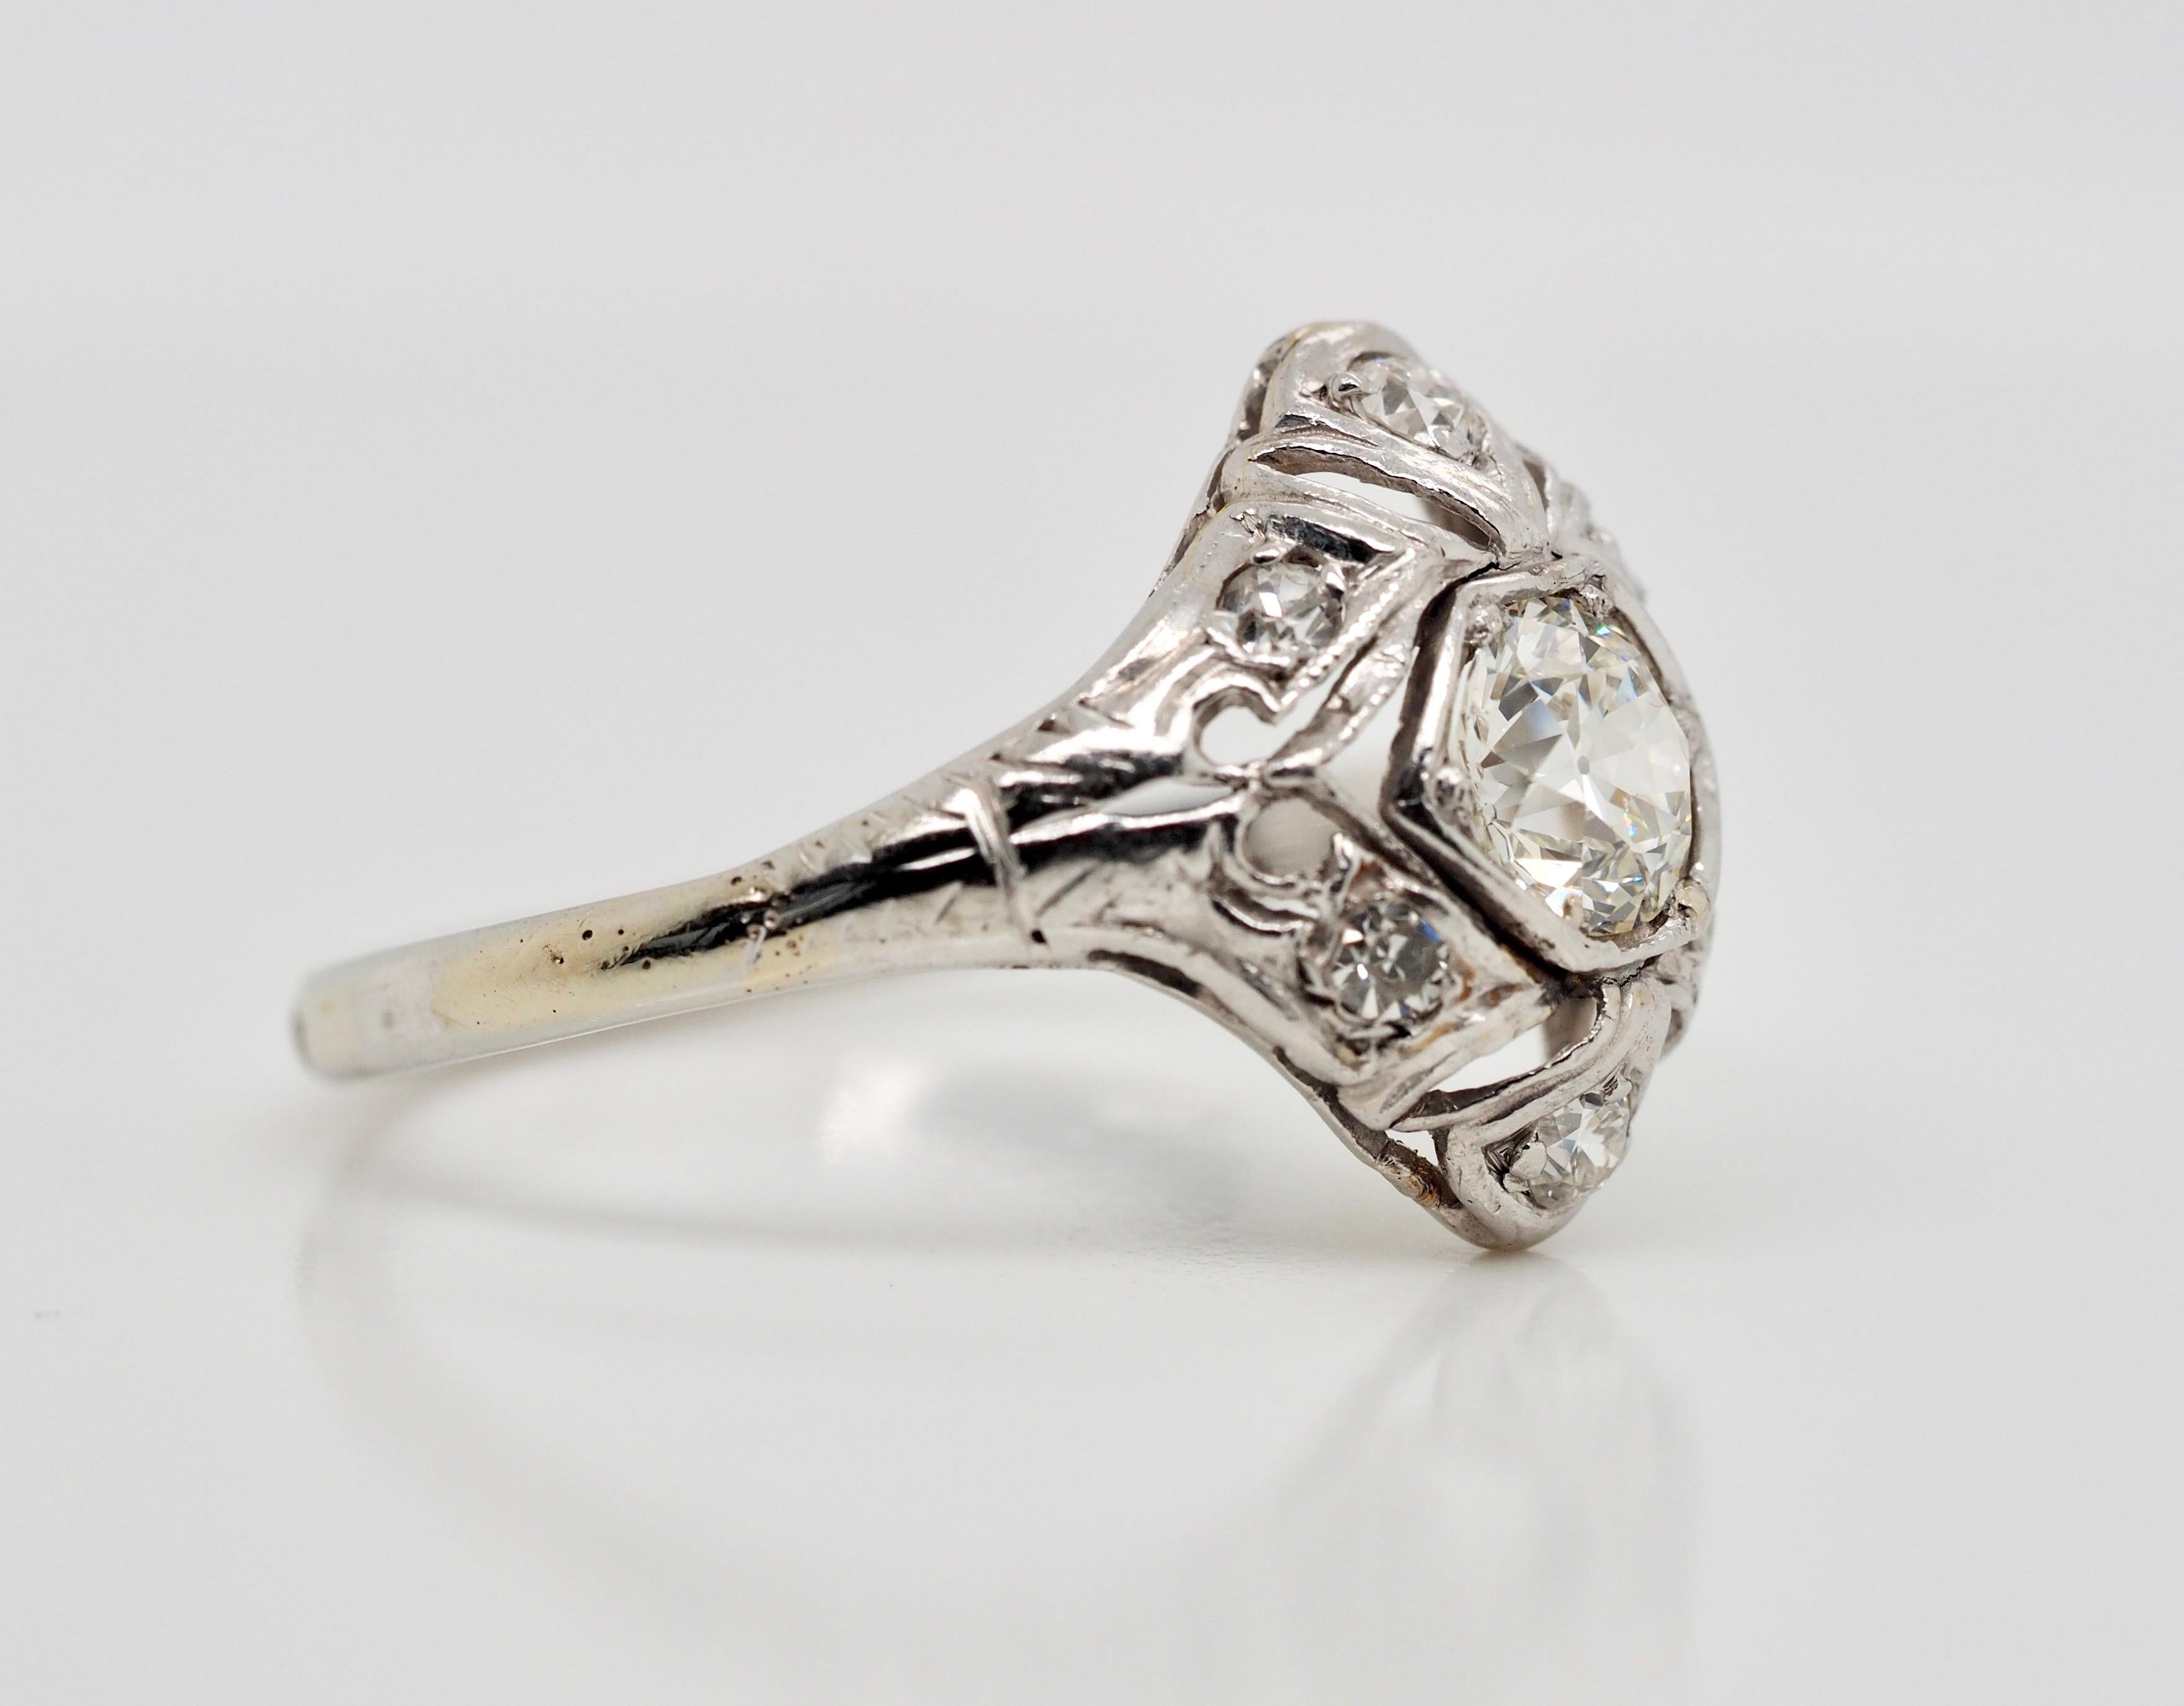 This Vintage Art Deco Ring is crafted in 18K white gold and dates back to the 1920's. The brilliant center diamond is a 0.70 carat old European cut, H Color VS2 clarity. There are 6 accenting European cut diamonds set around the center stone